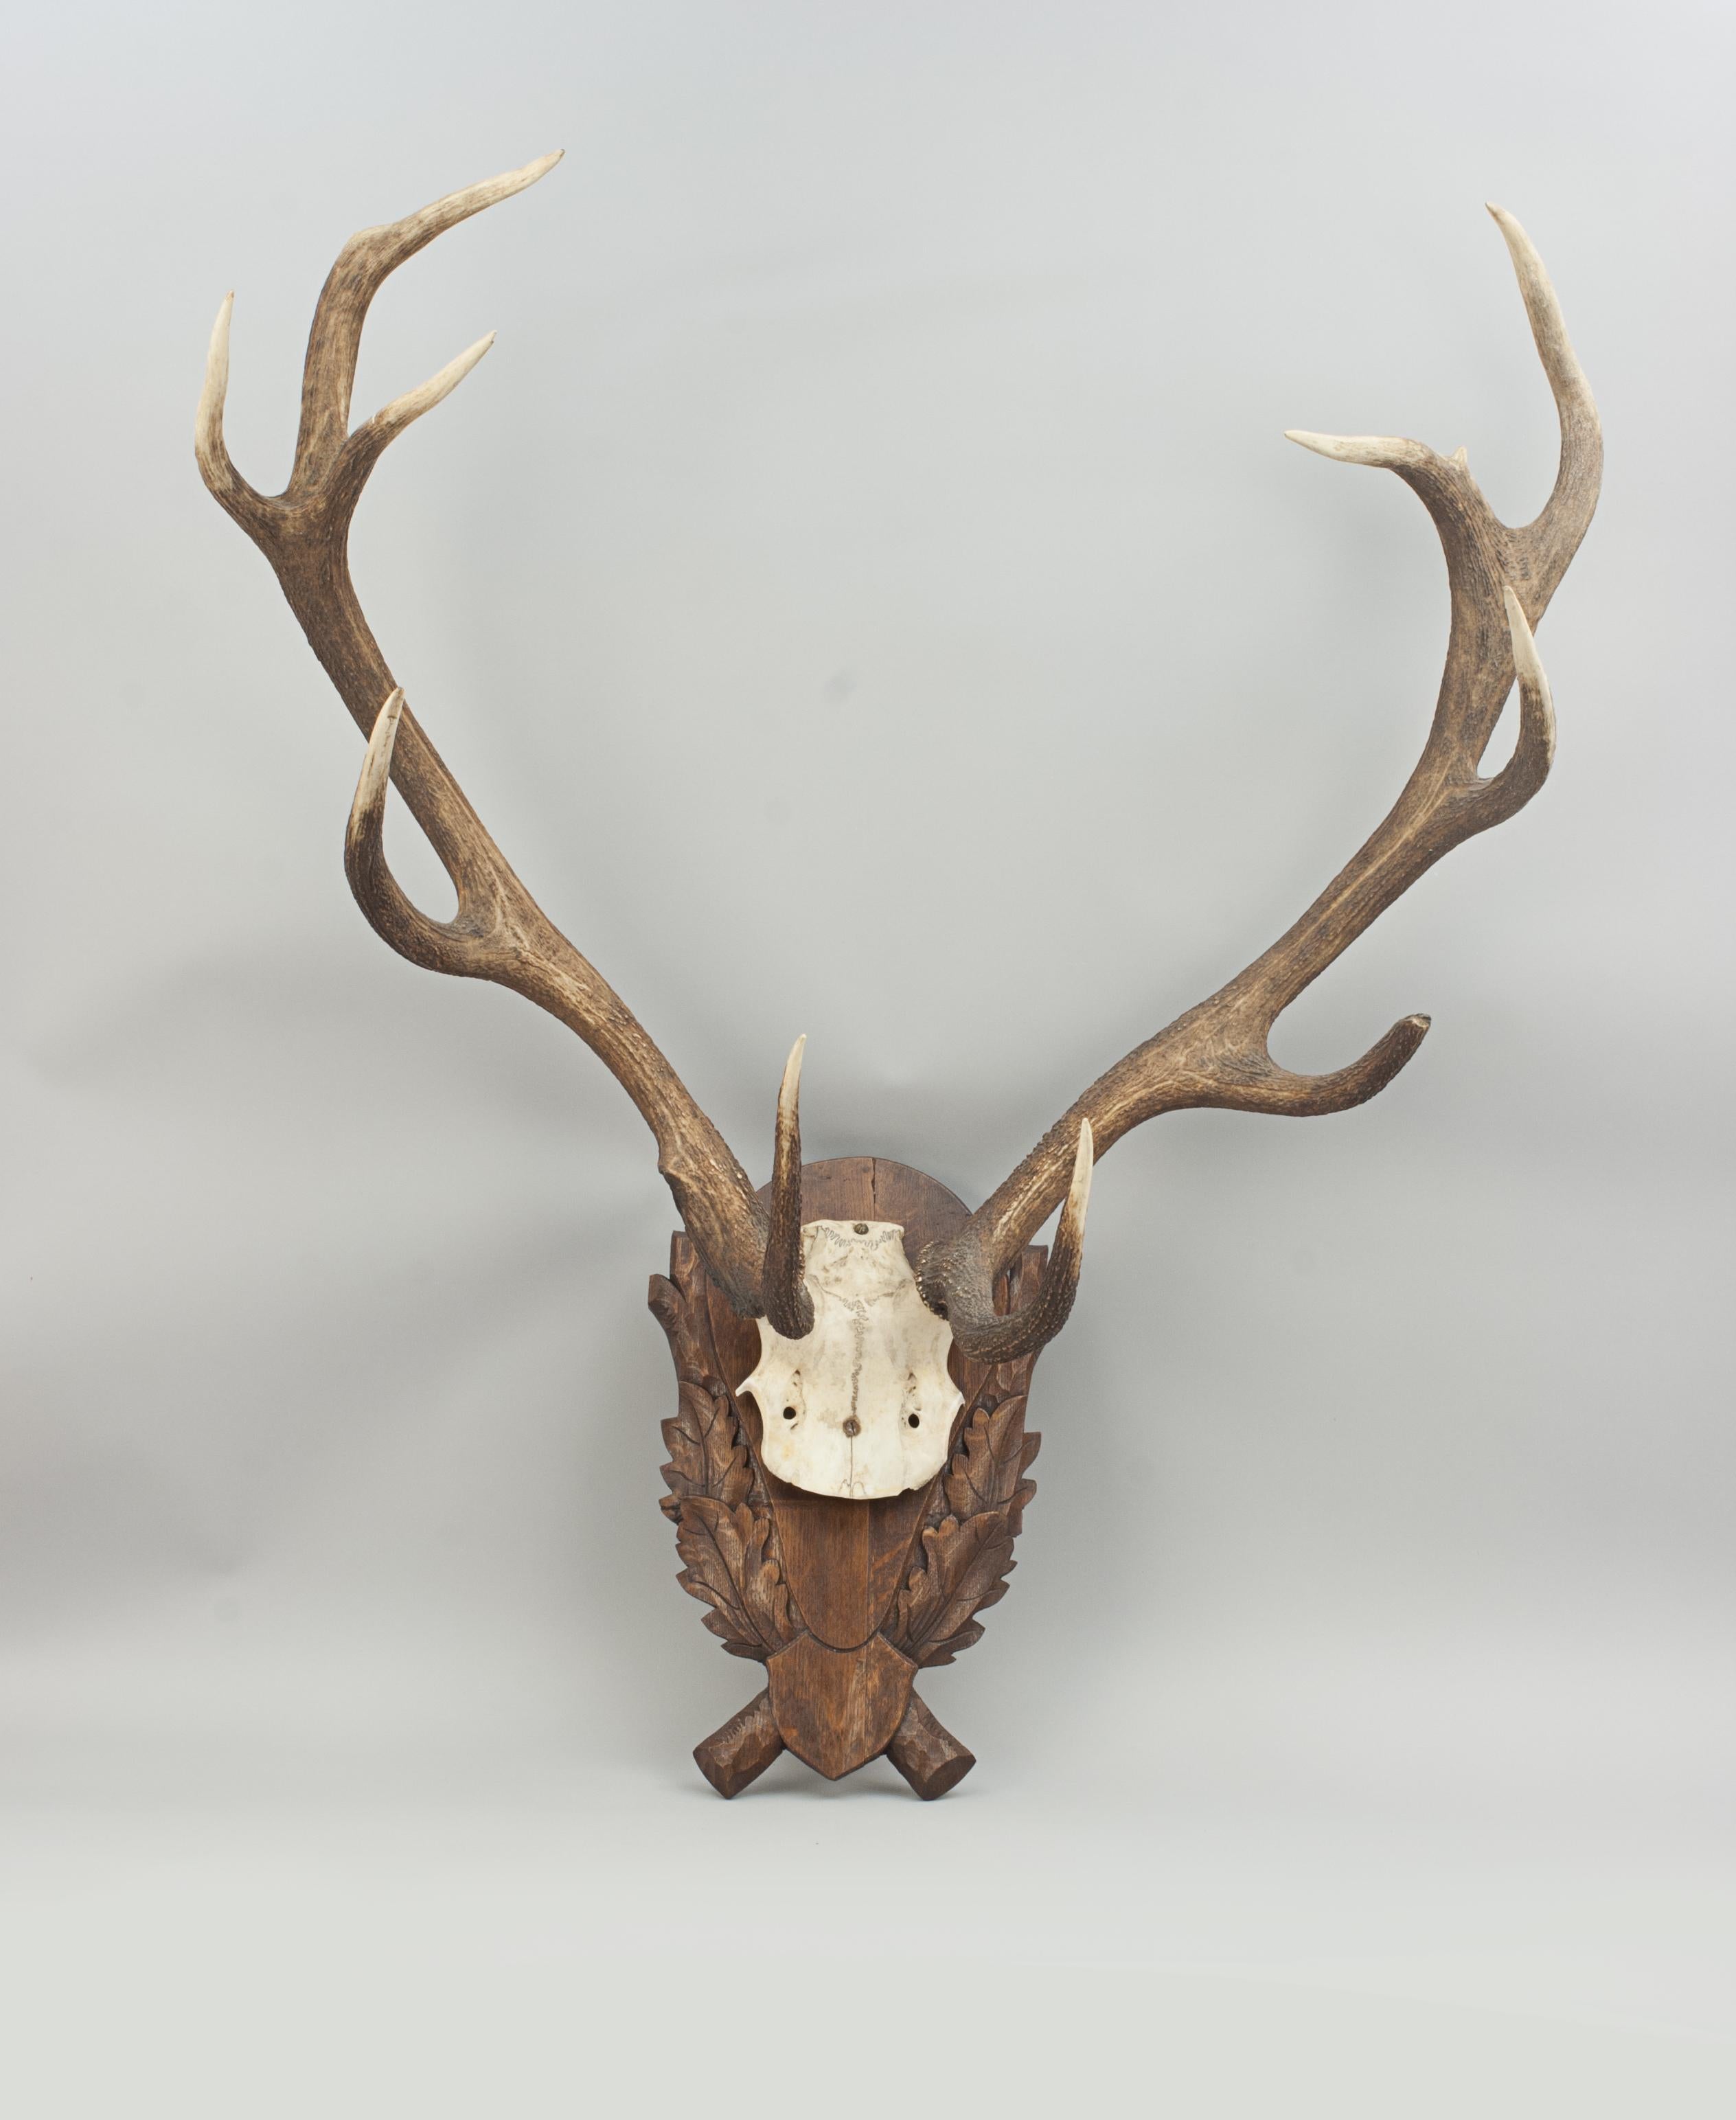 Set of mounted red deer antlers.
A large pair of 10 point red deer antlers with skull cap, mounted onto an oak shield carved with oak leaves. These stag antlers are an excellent wall display. As the Taxidermist is unknown it is very difficult to